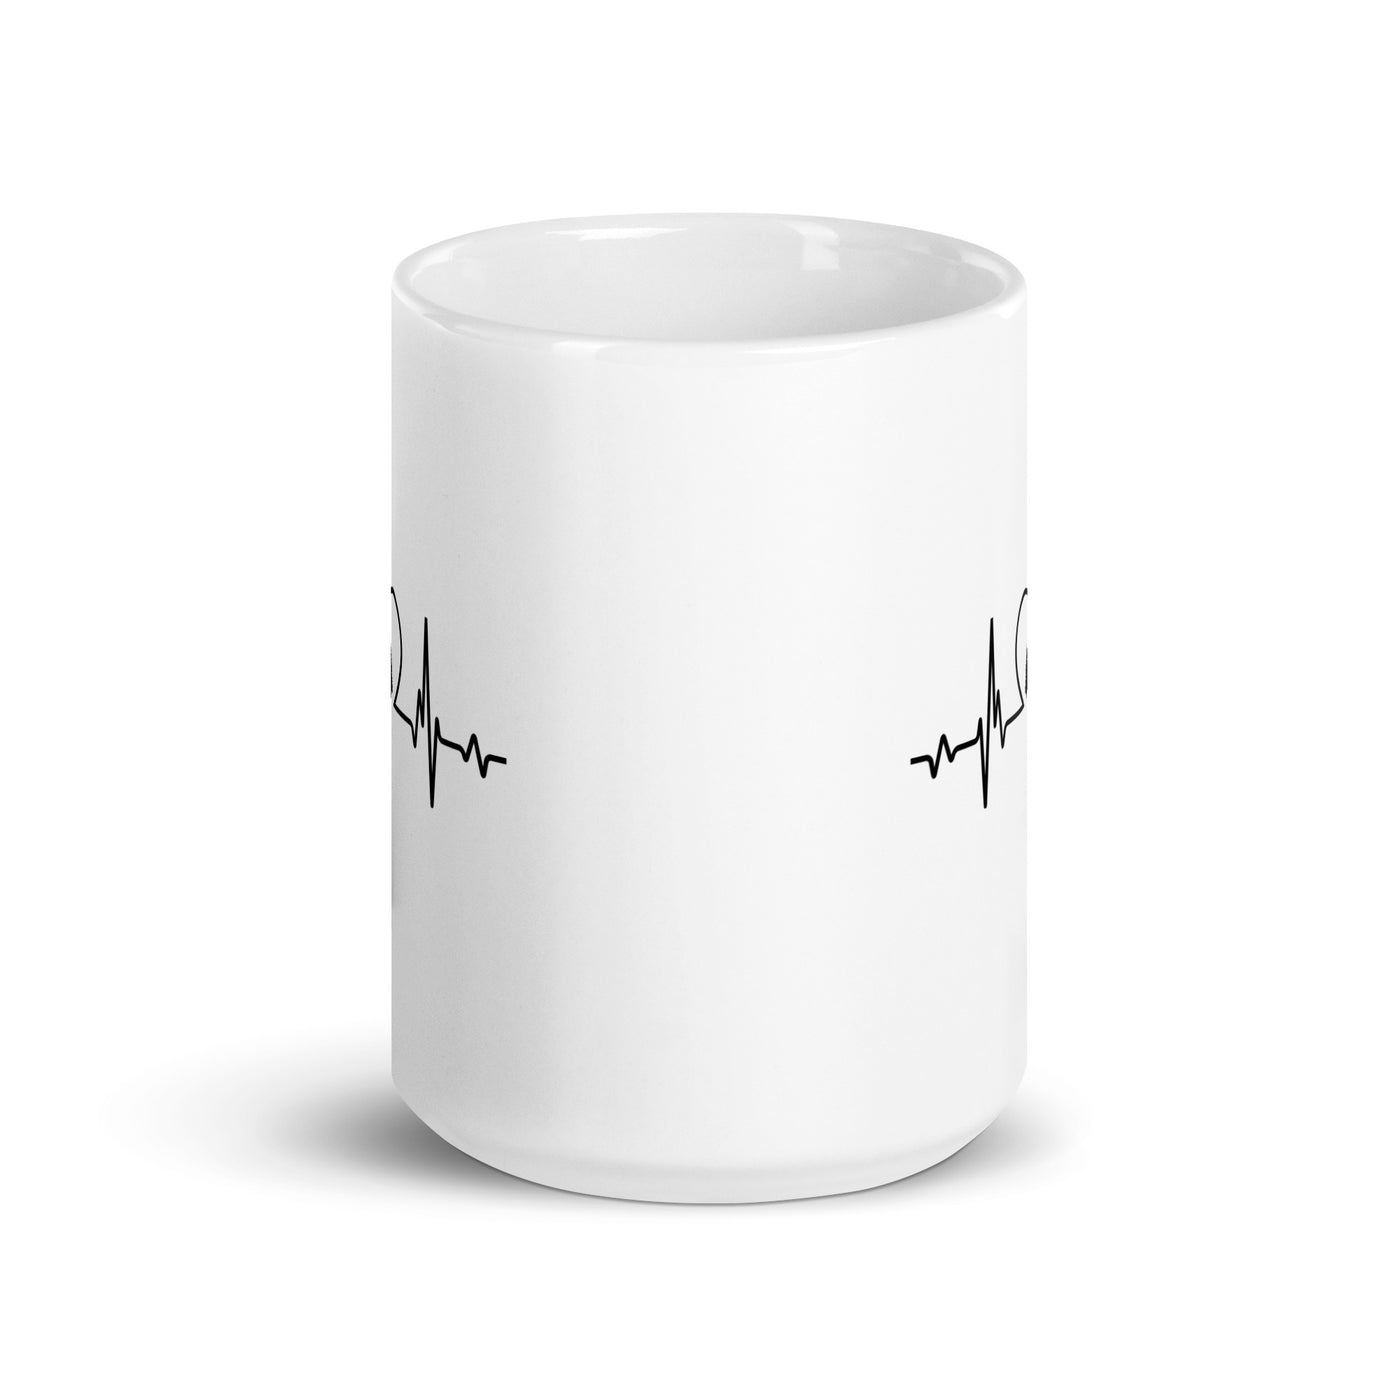 Heartbeat Heart And Tree - Tasse camping